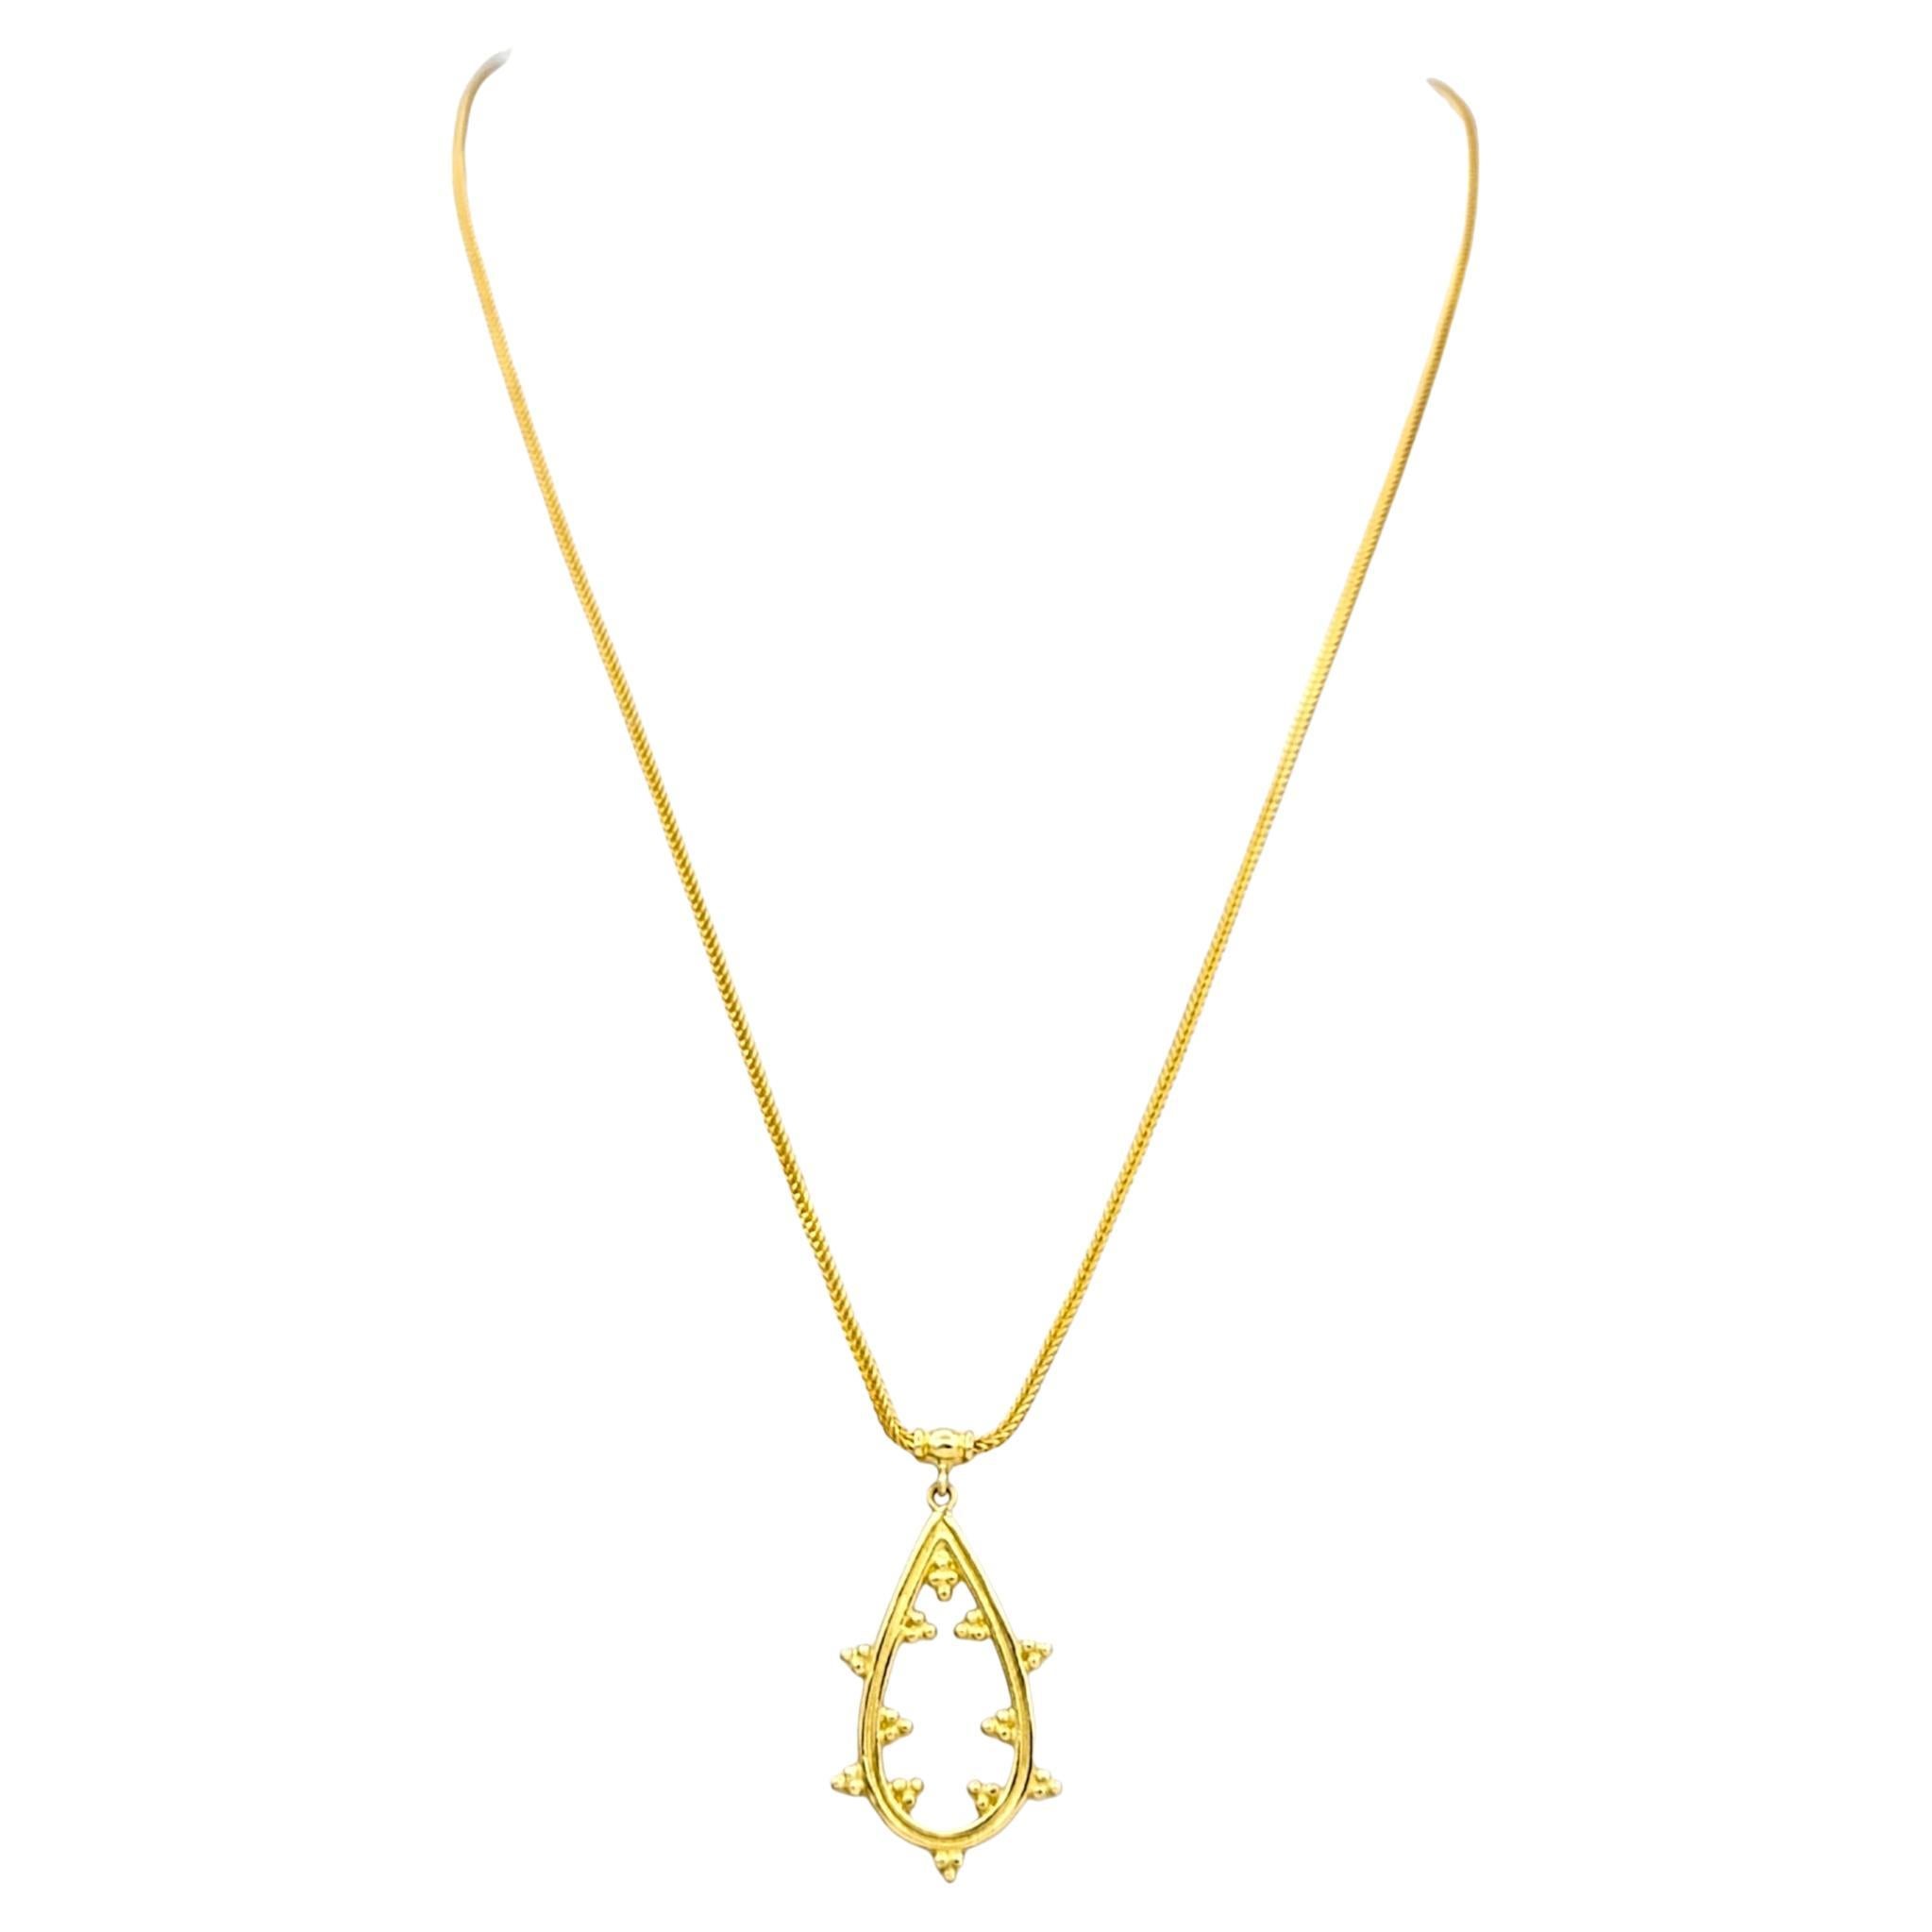 Pear Shaped Open Pendant Necklace with Bead Clusters in 18 Karat Yellow Gold For Sale